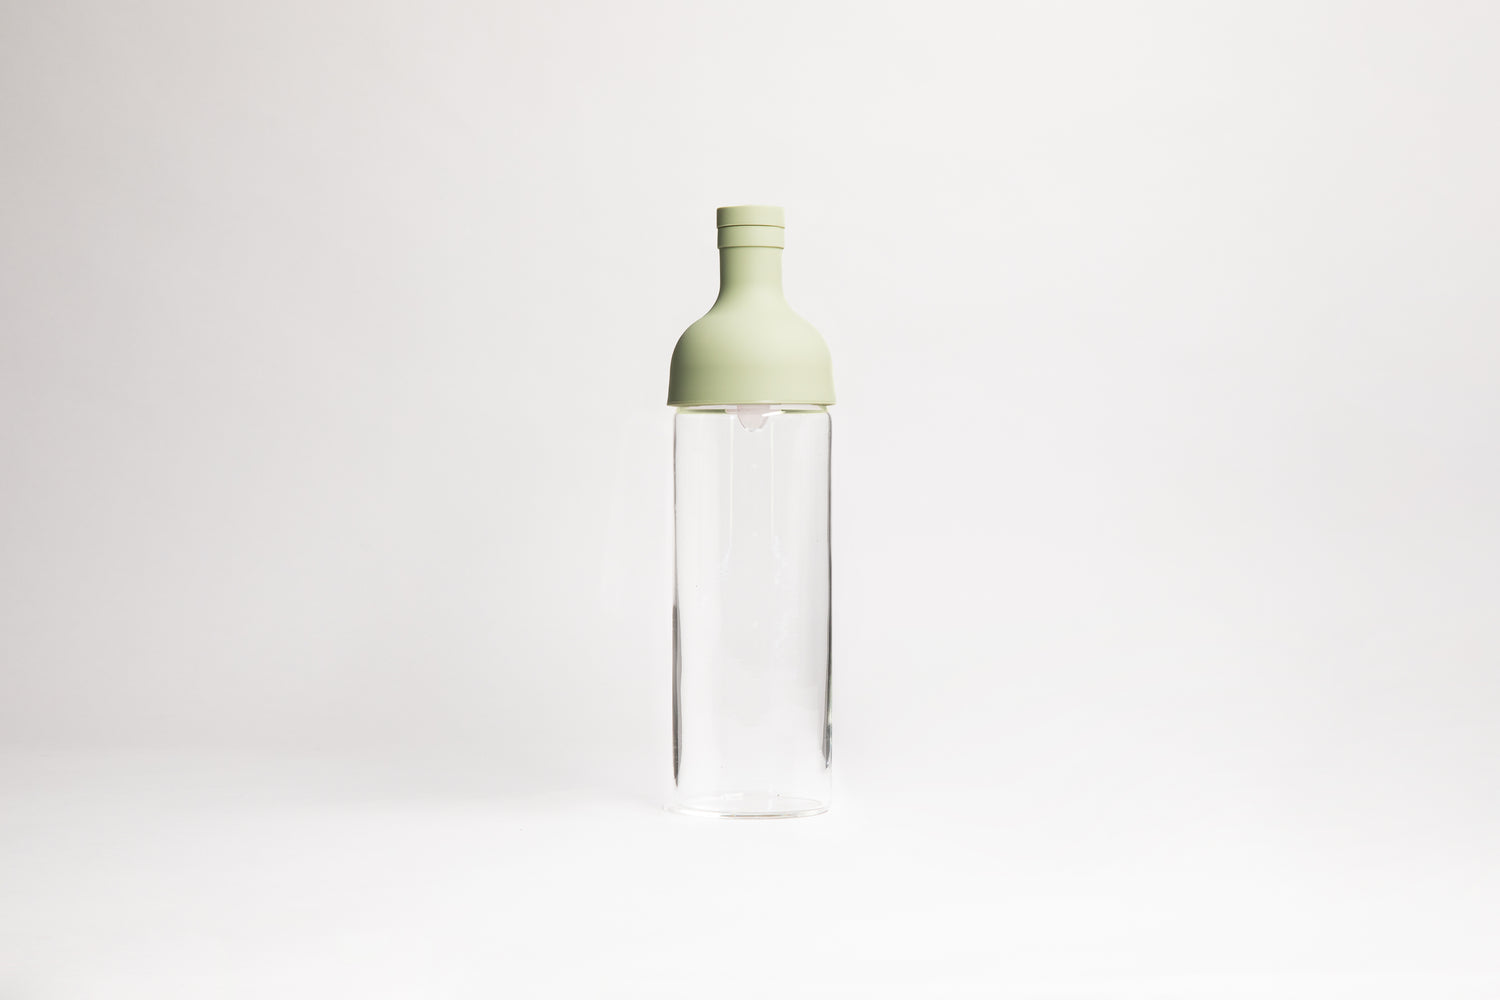 Tall glass container with light green rubber wine bottle shaped top on an white backdrop.